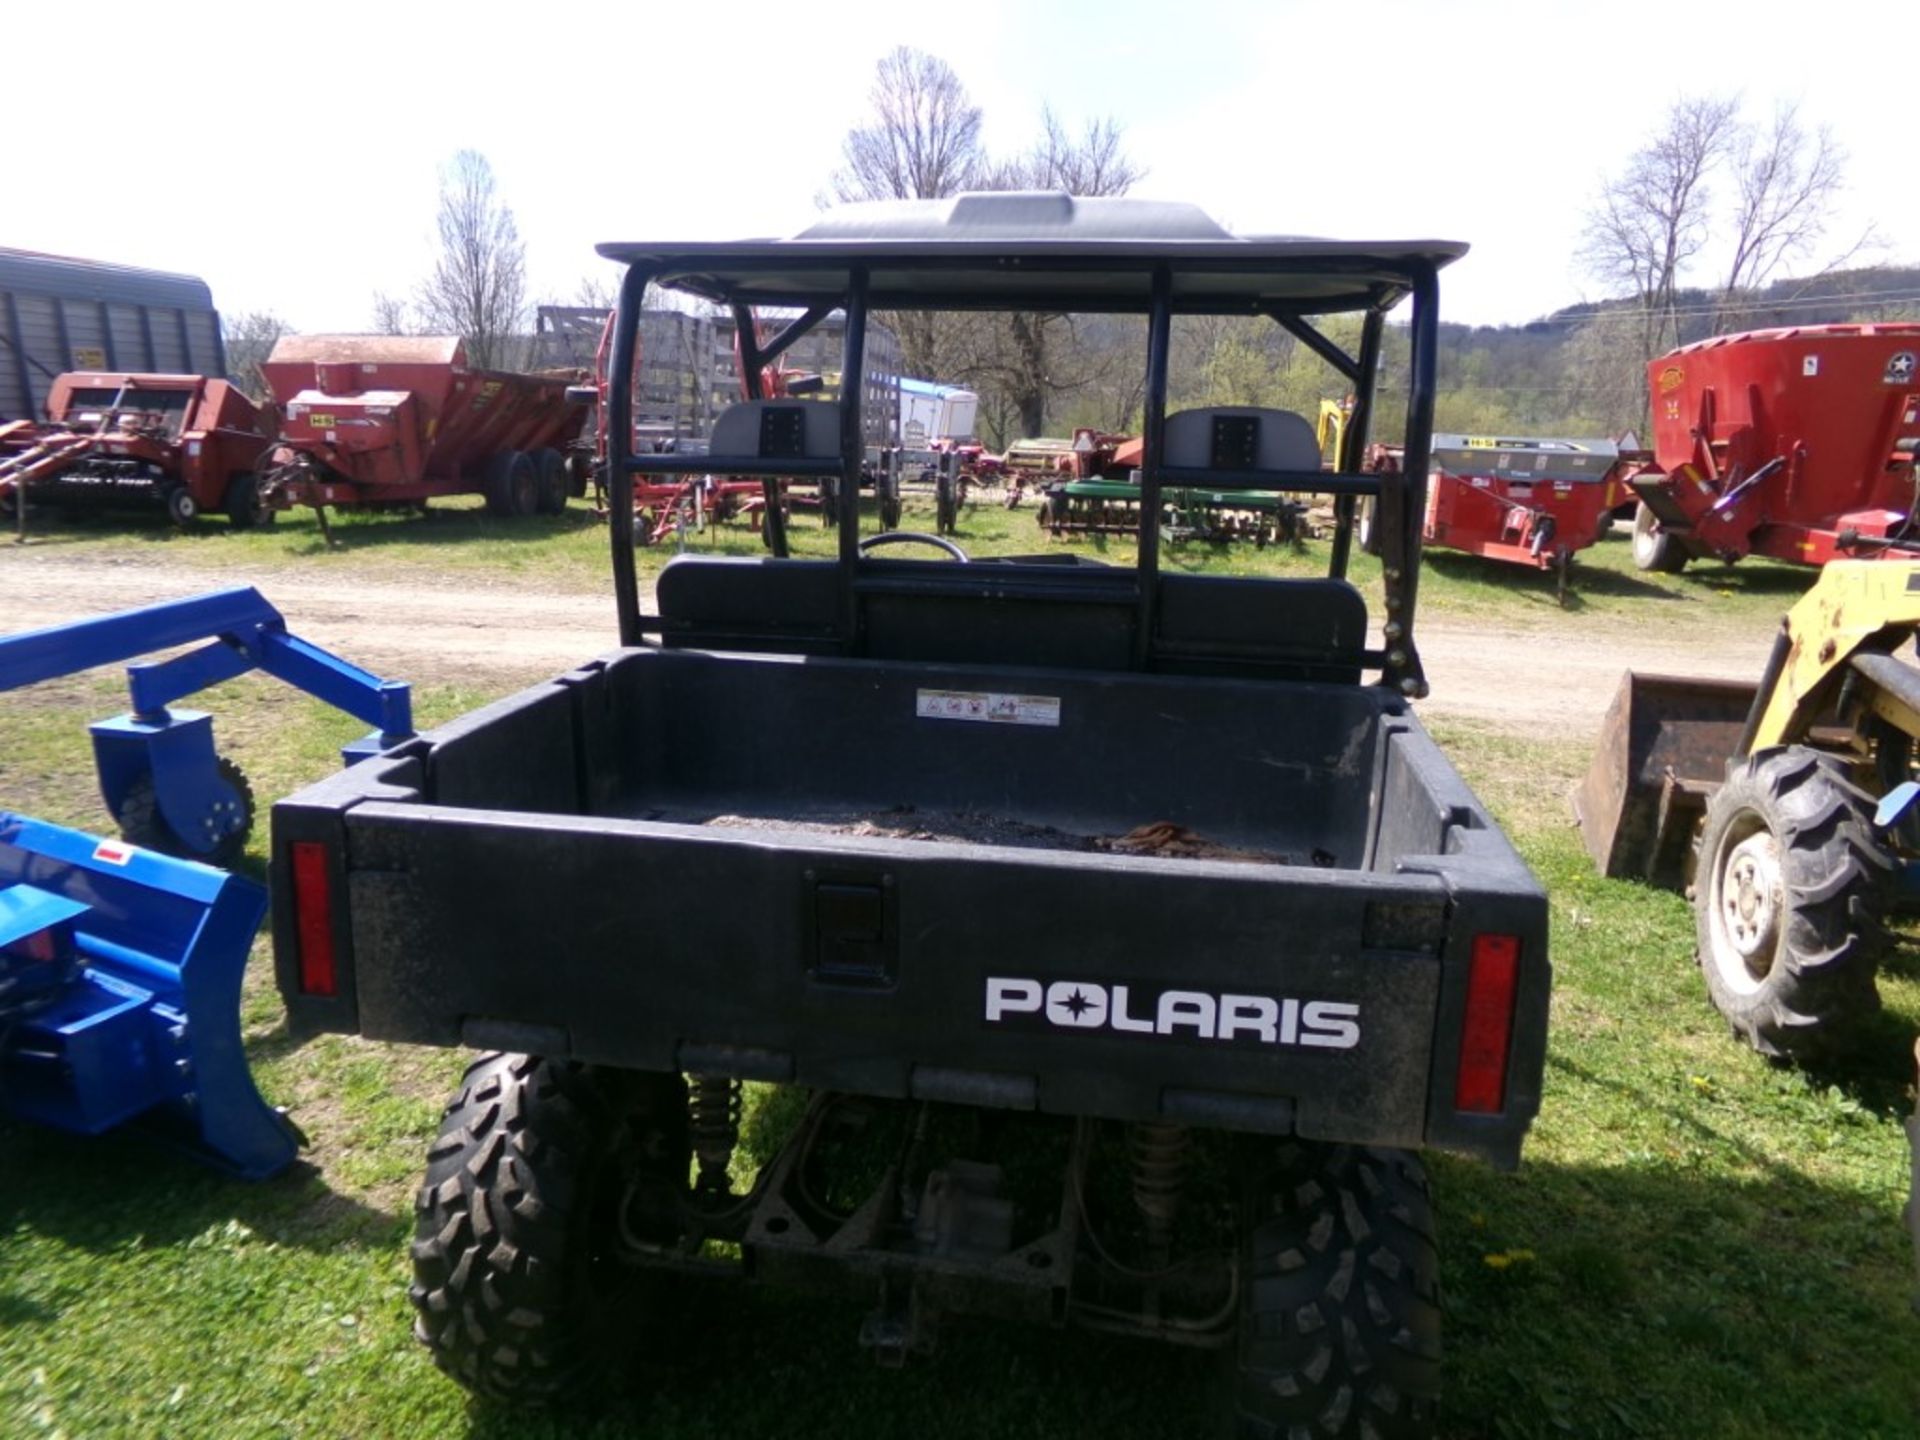 Polaris Ranger, 4wd, Canopy, Gas Eng., Shows 221 Hrs., NOT RUNNING, NEEDS WORK (4382) - Image 3 of 3